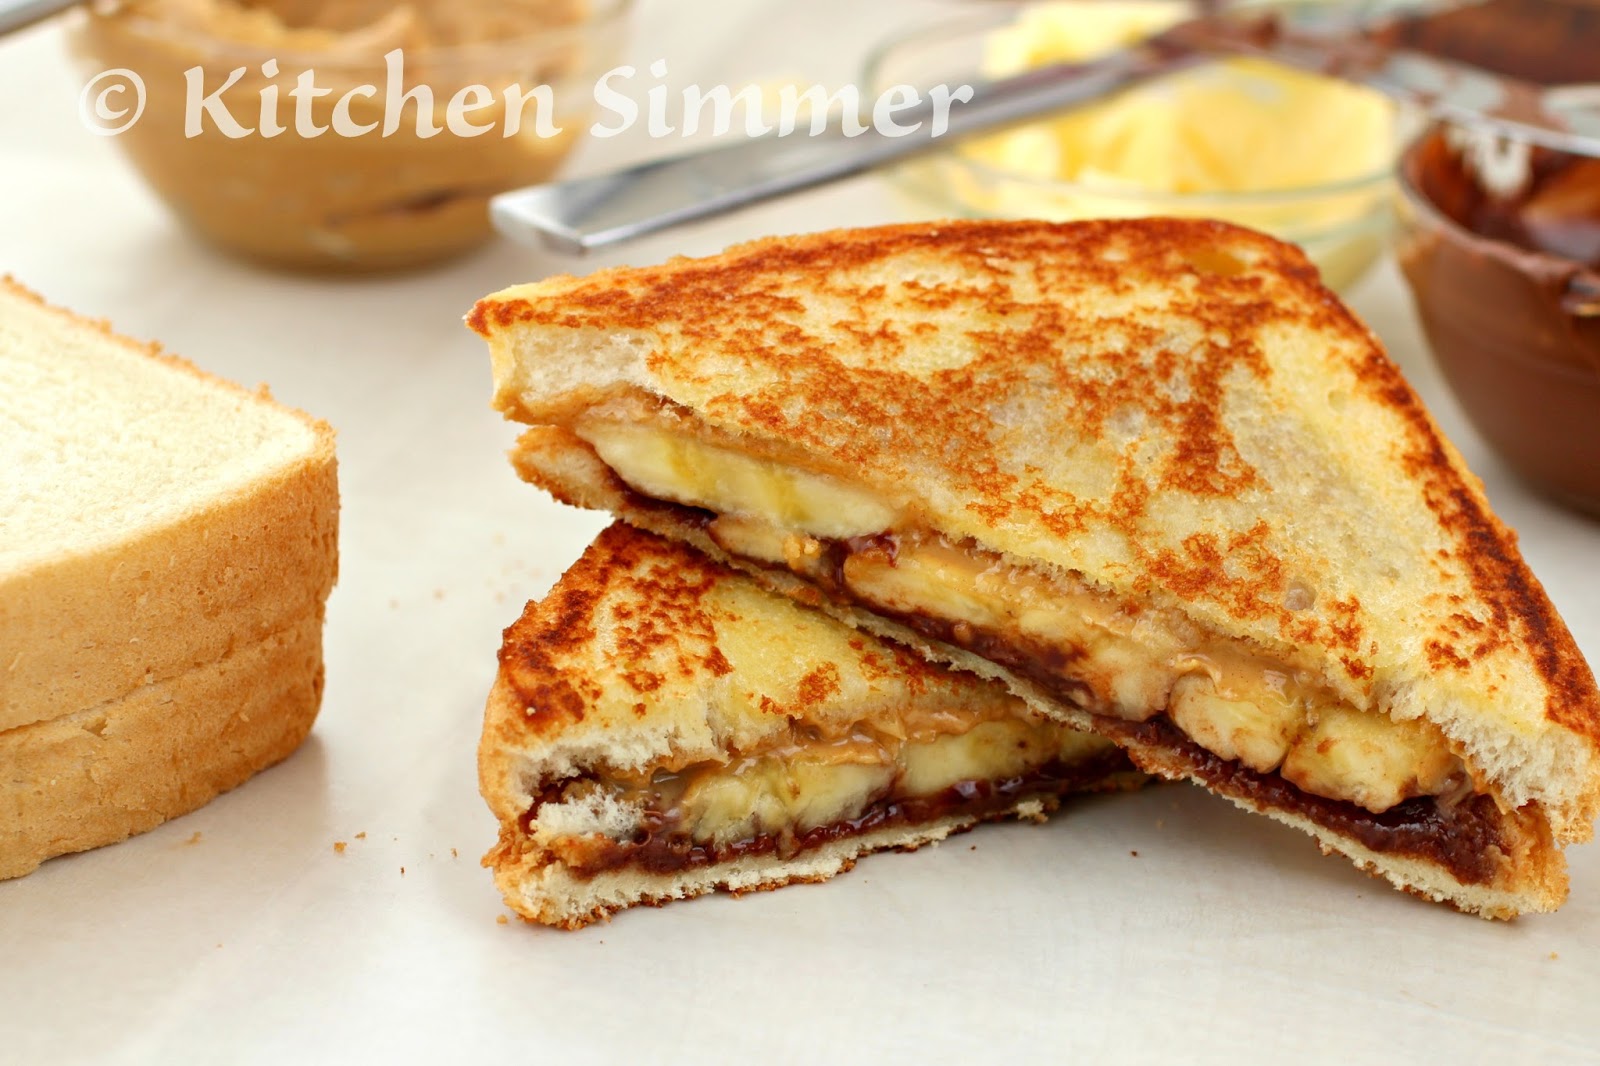 Kitchen Simmer: Grilled Peanut Butter Banana and Nutella Sandwich